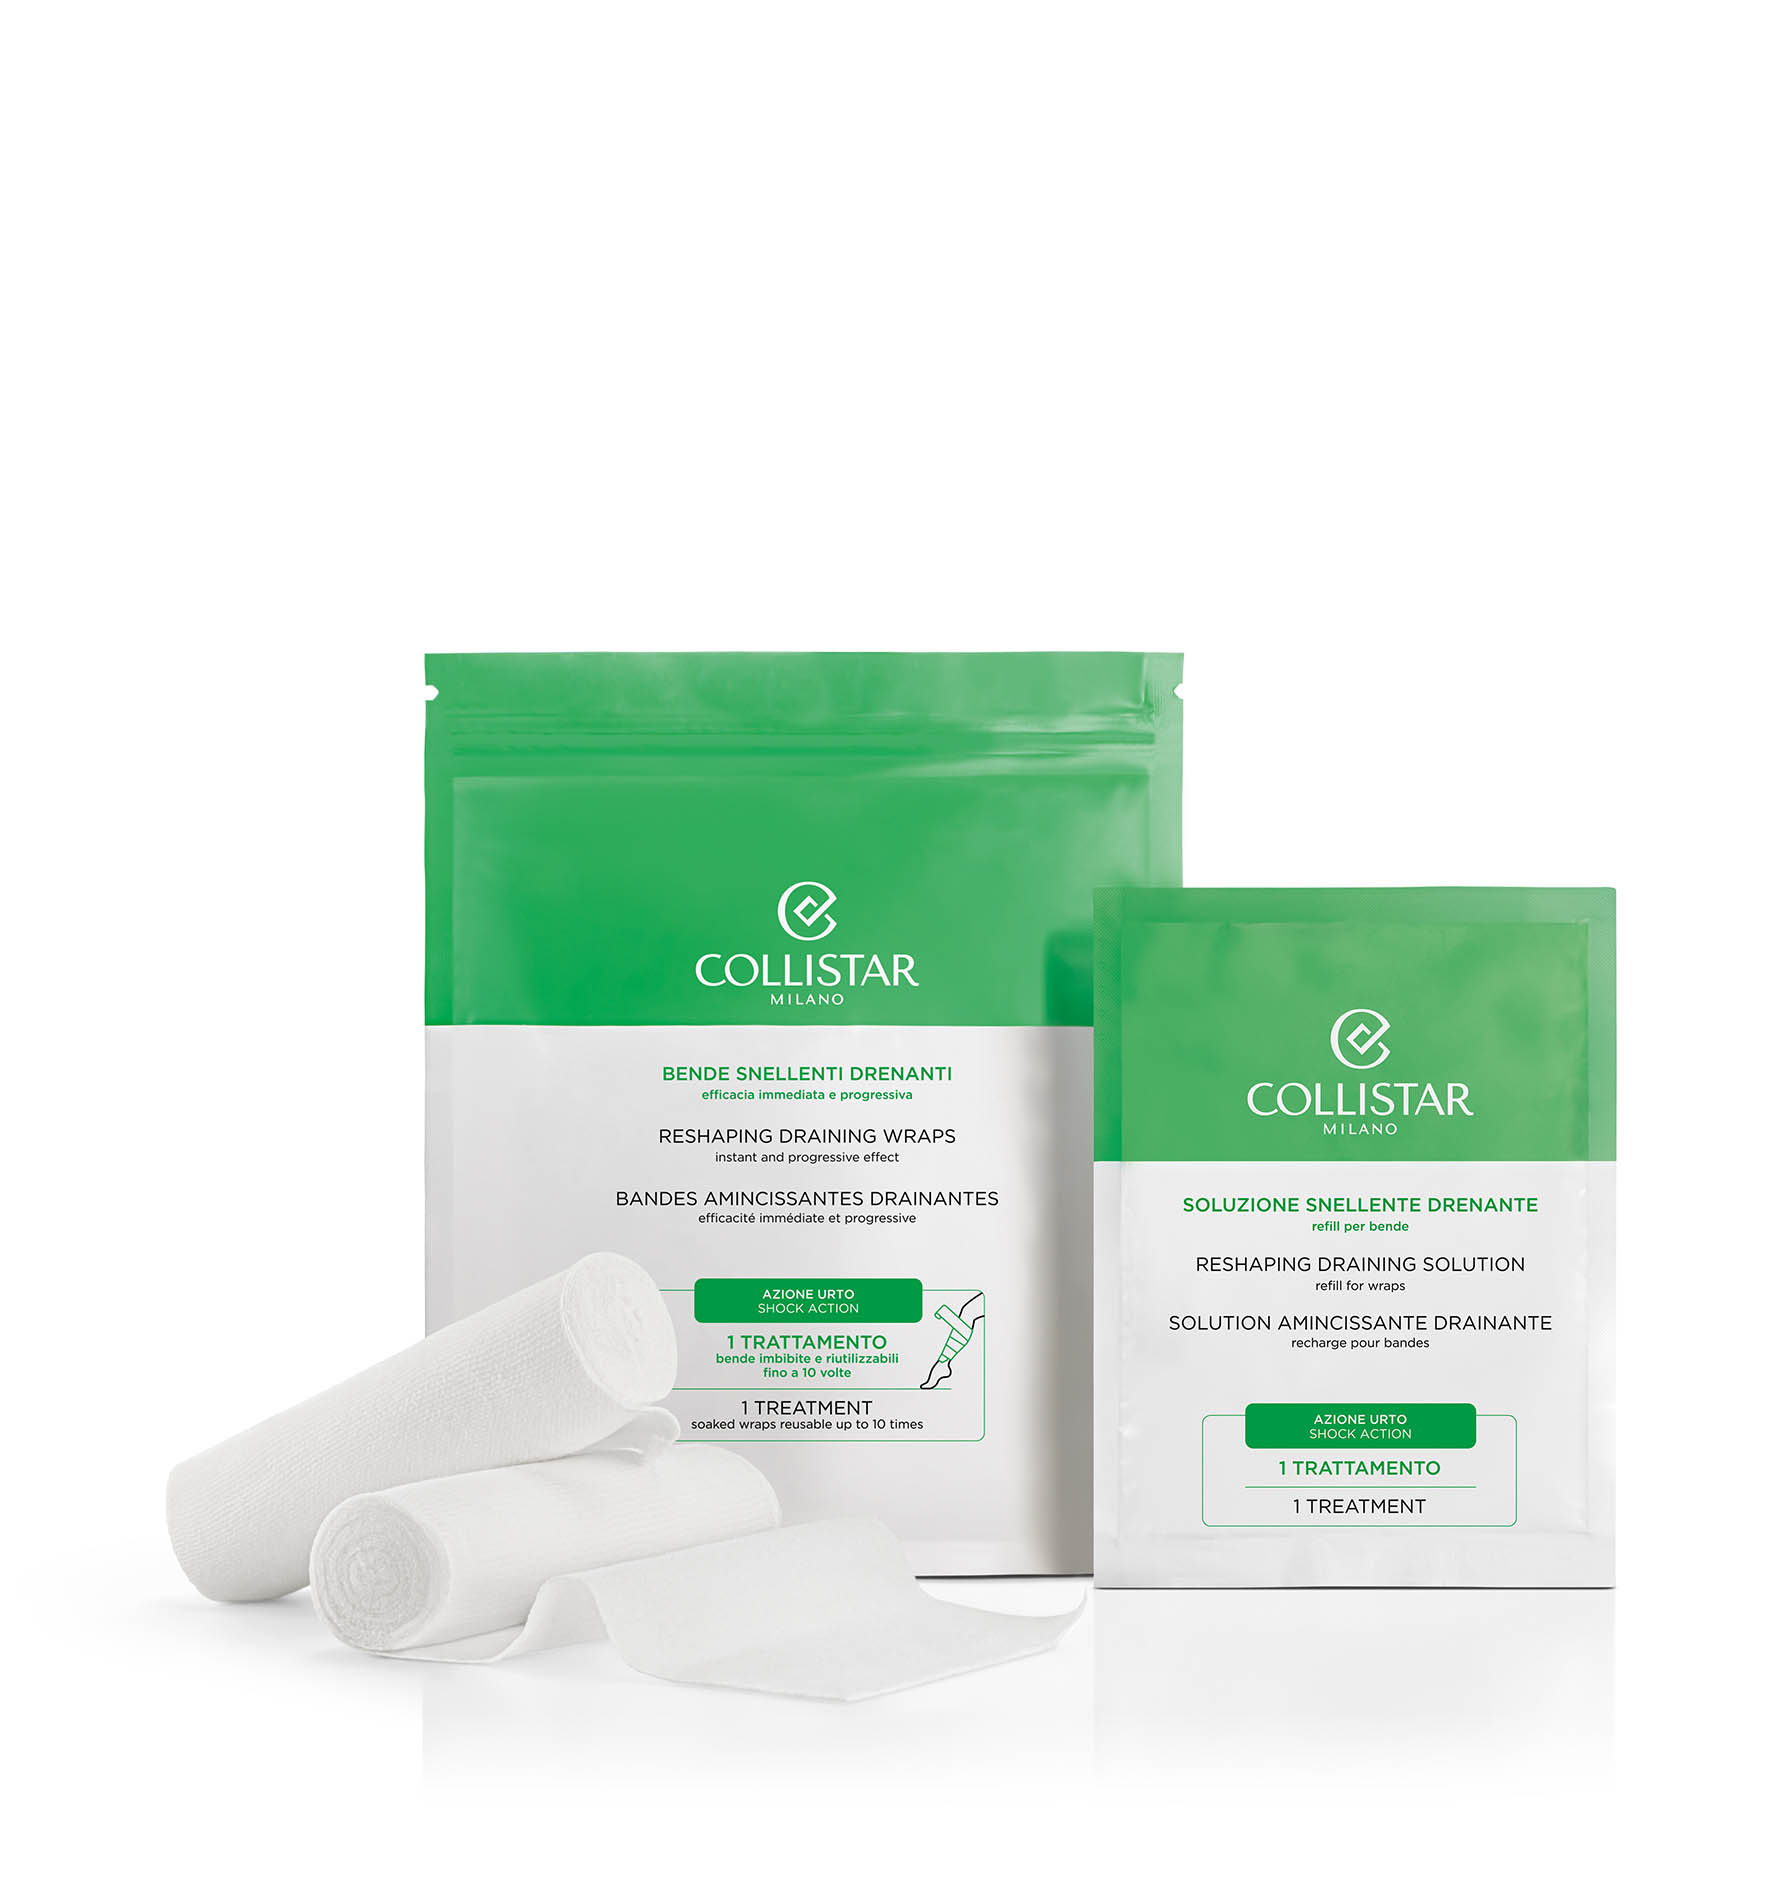 RESHAPING DRAINING WRAPS - Anti-cellulite and slimming | Collistar - Shop Online Ufficiale